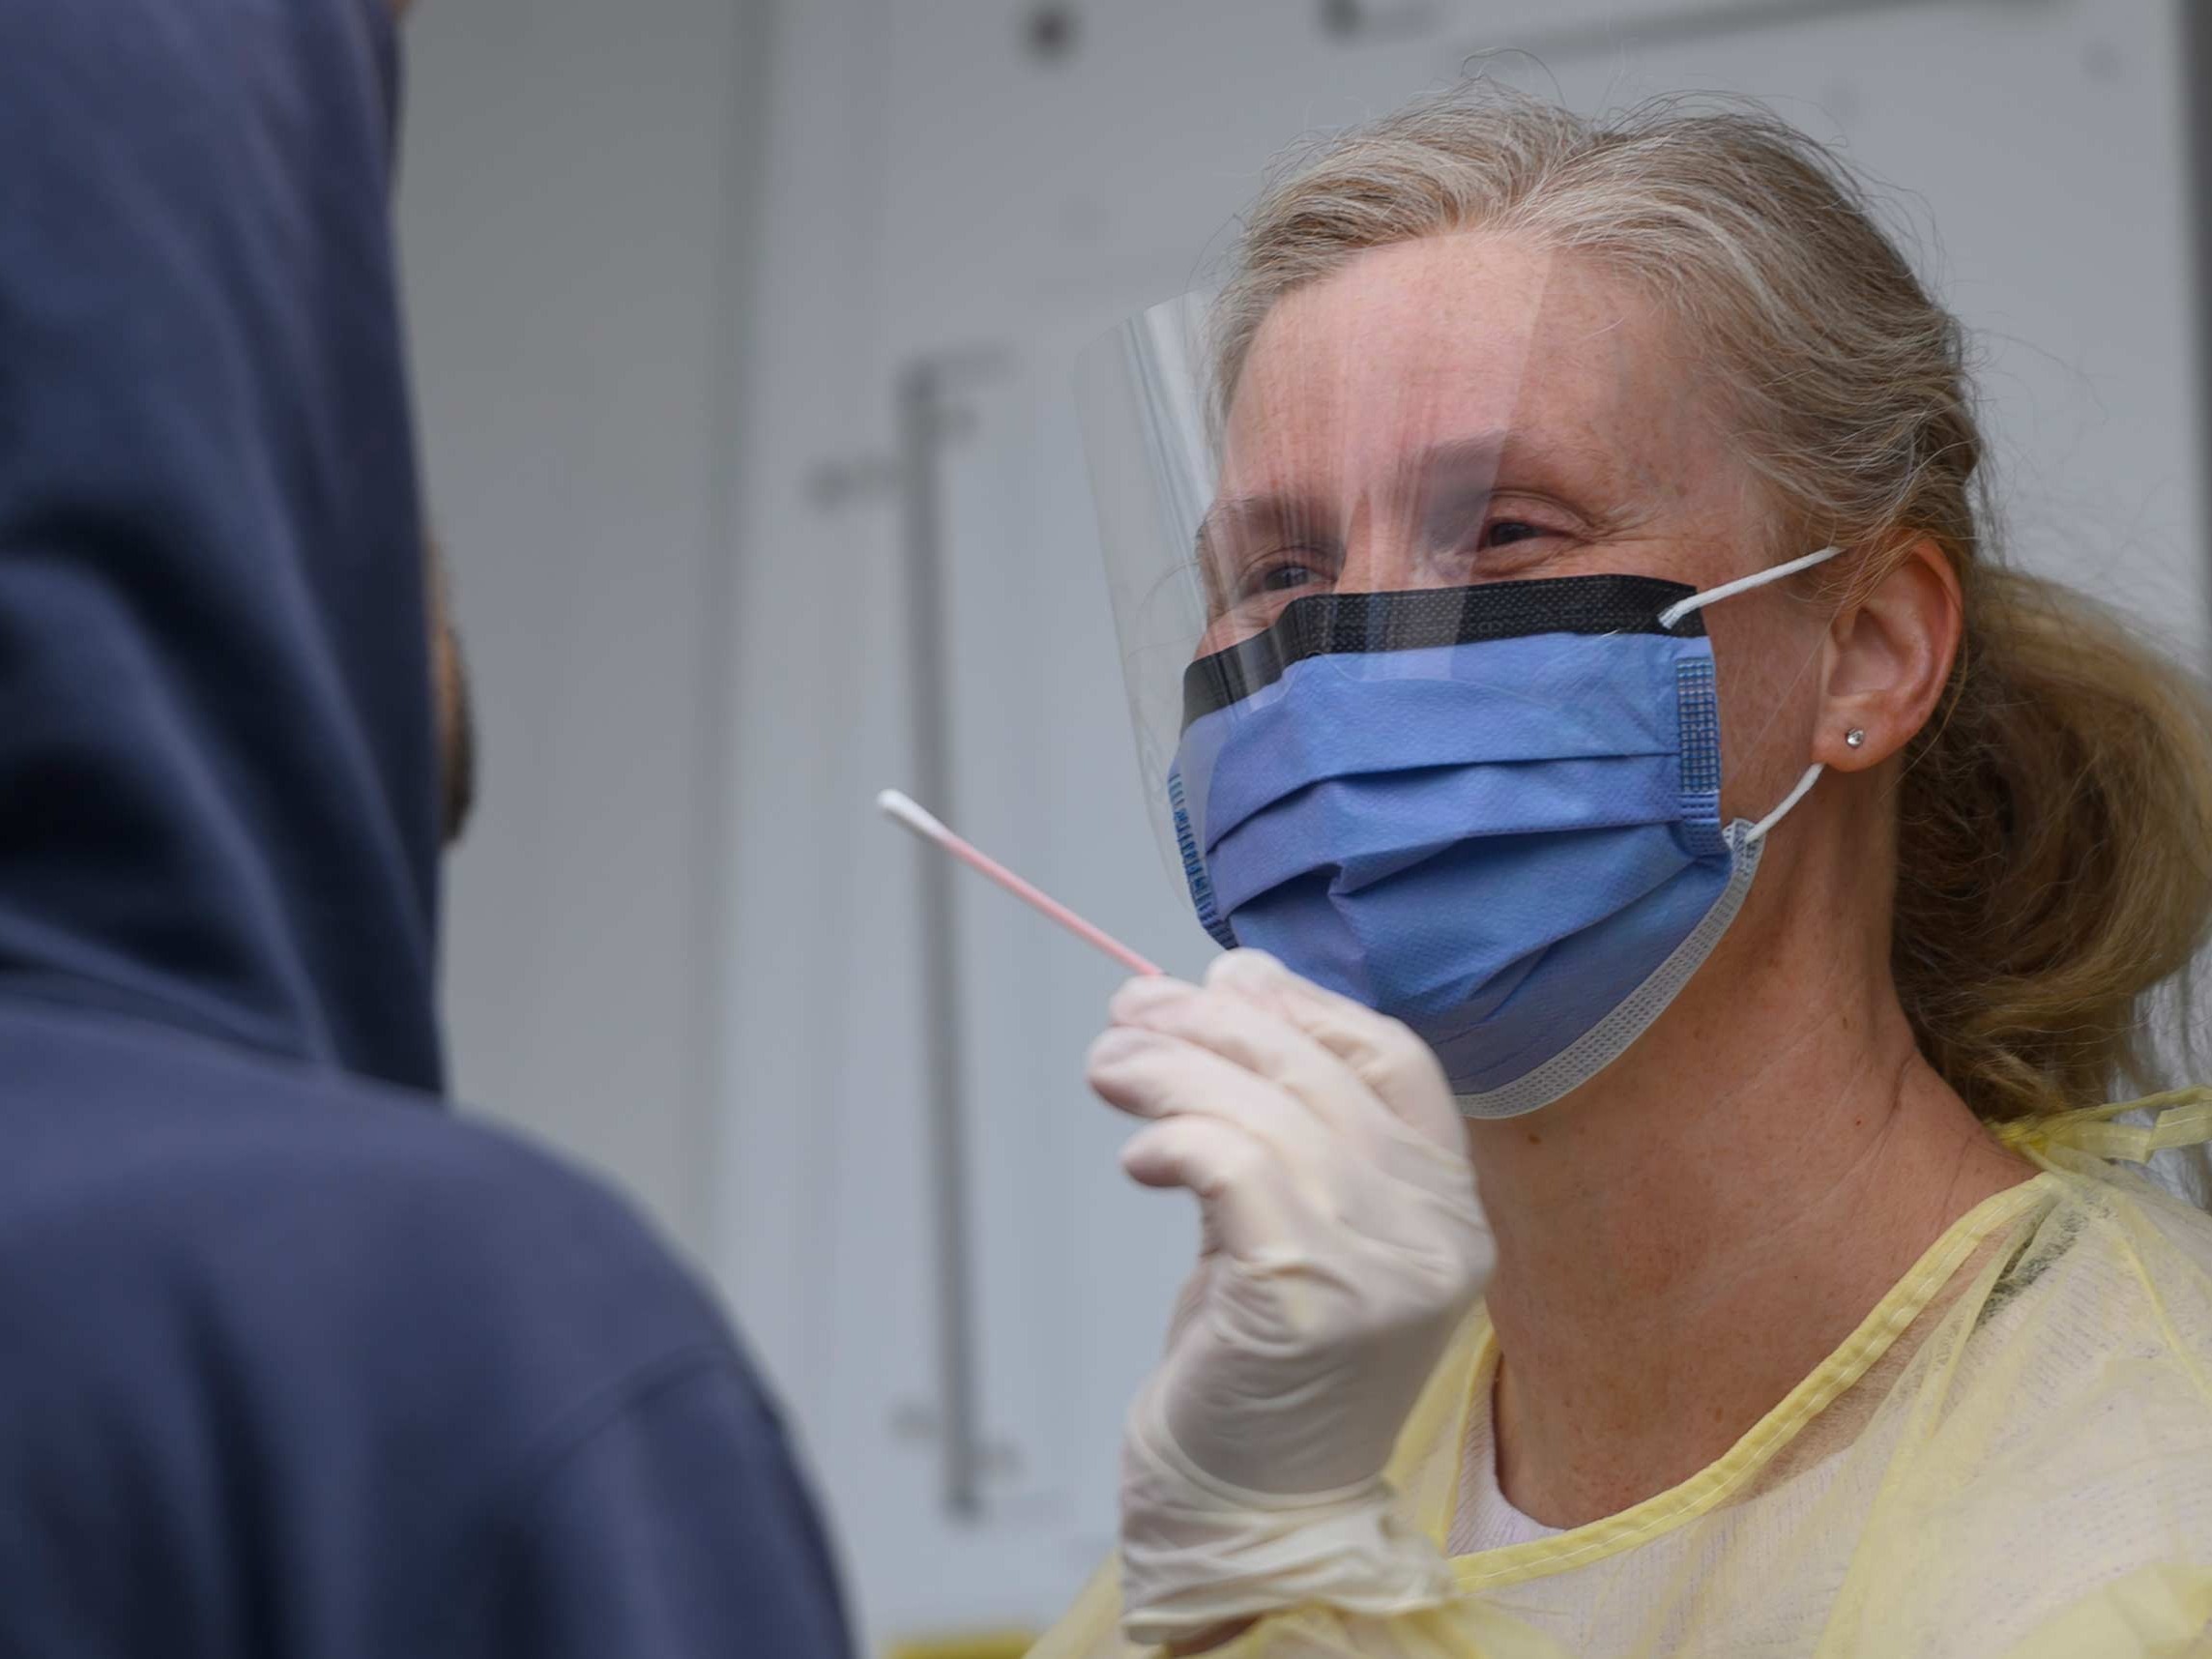 A nurse in personal protective gear administering a test.